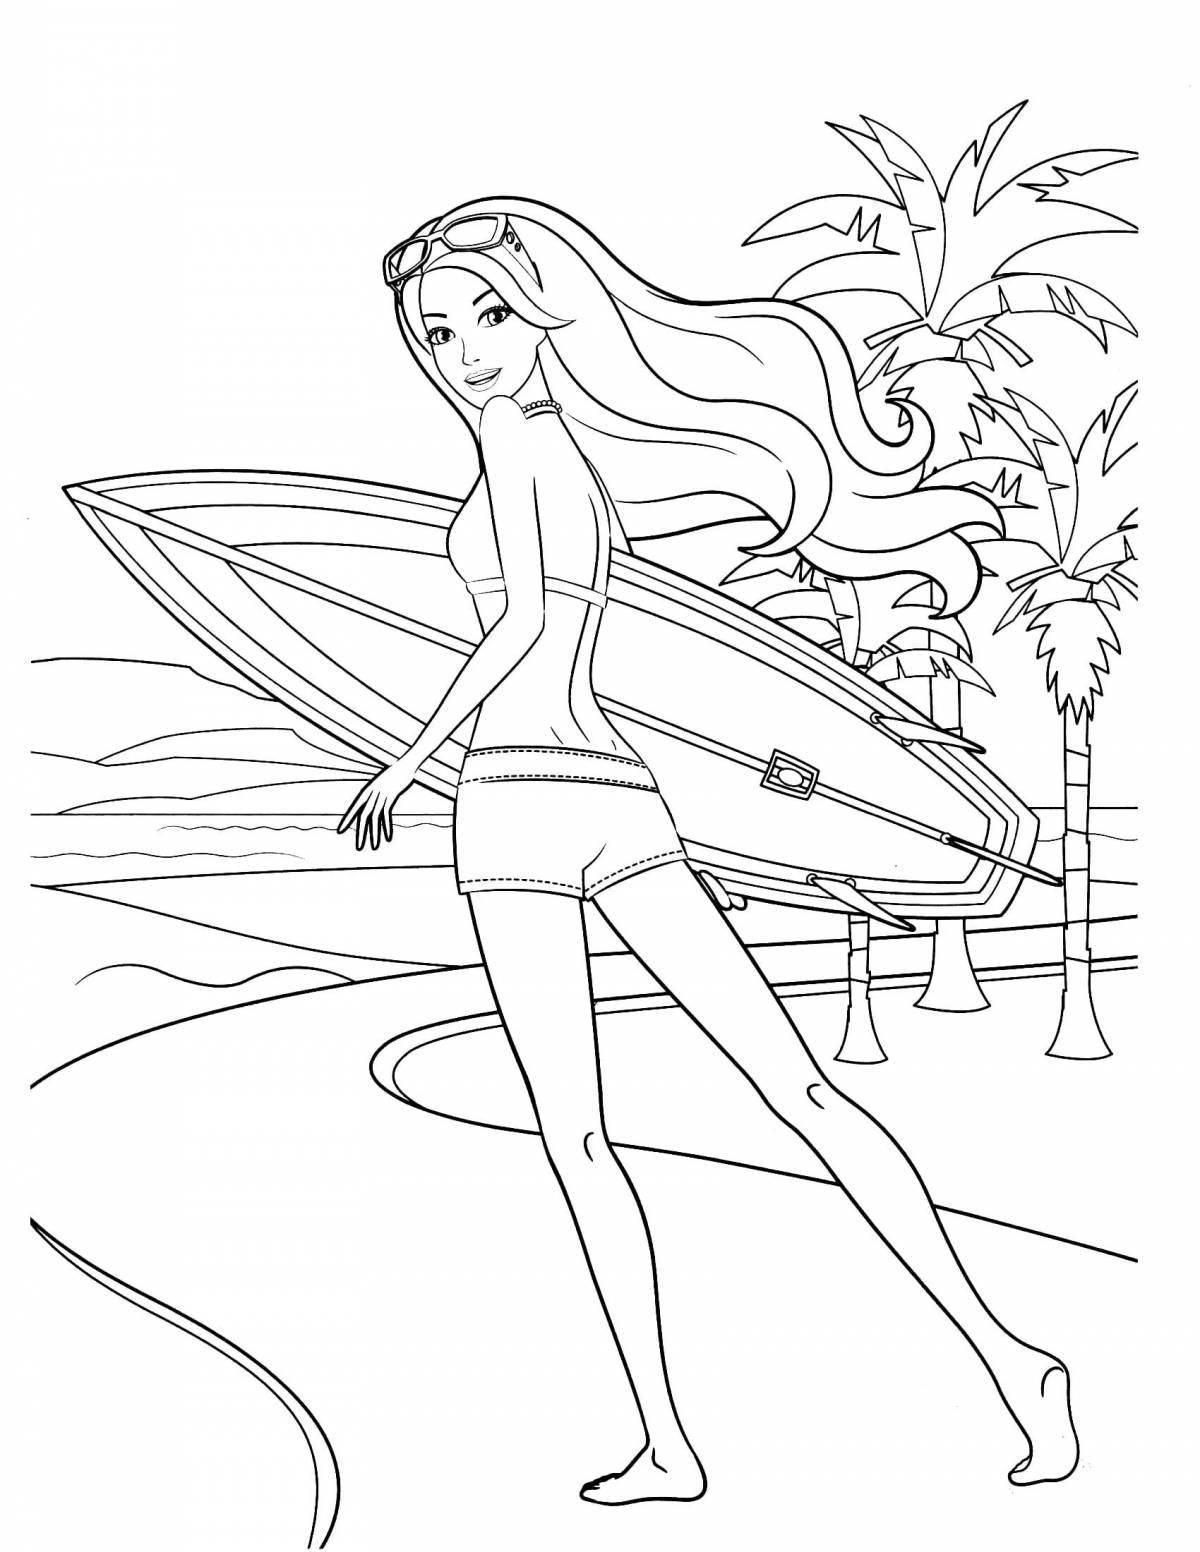 Charming barbie coloring book for kids 5-6 years old